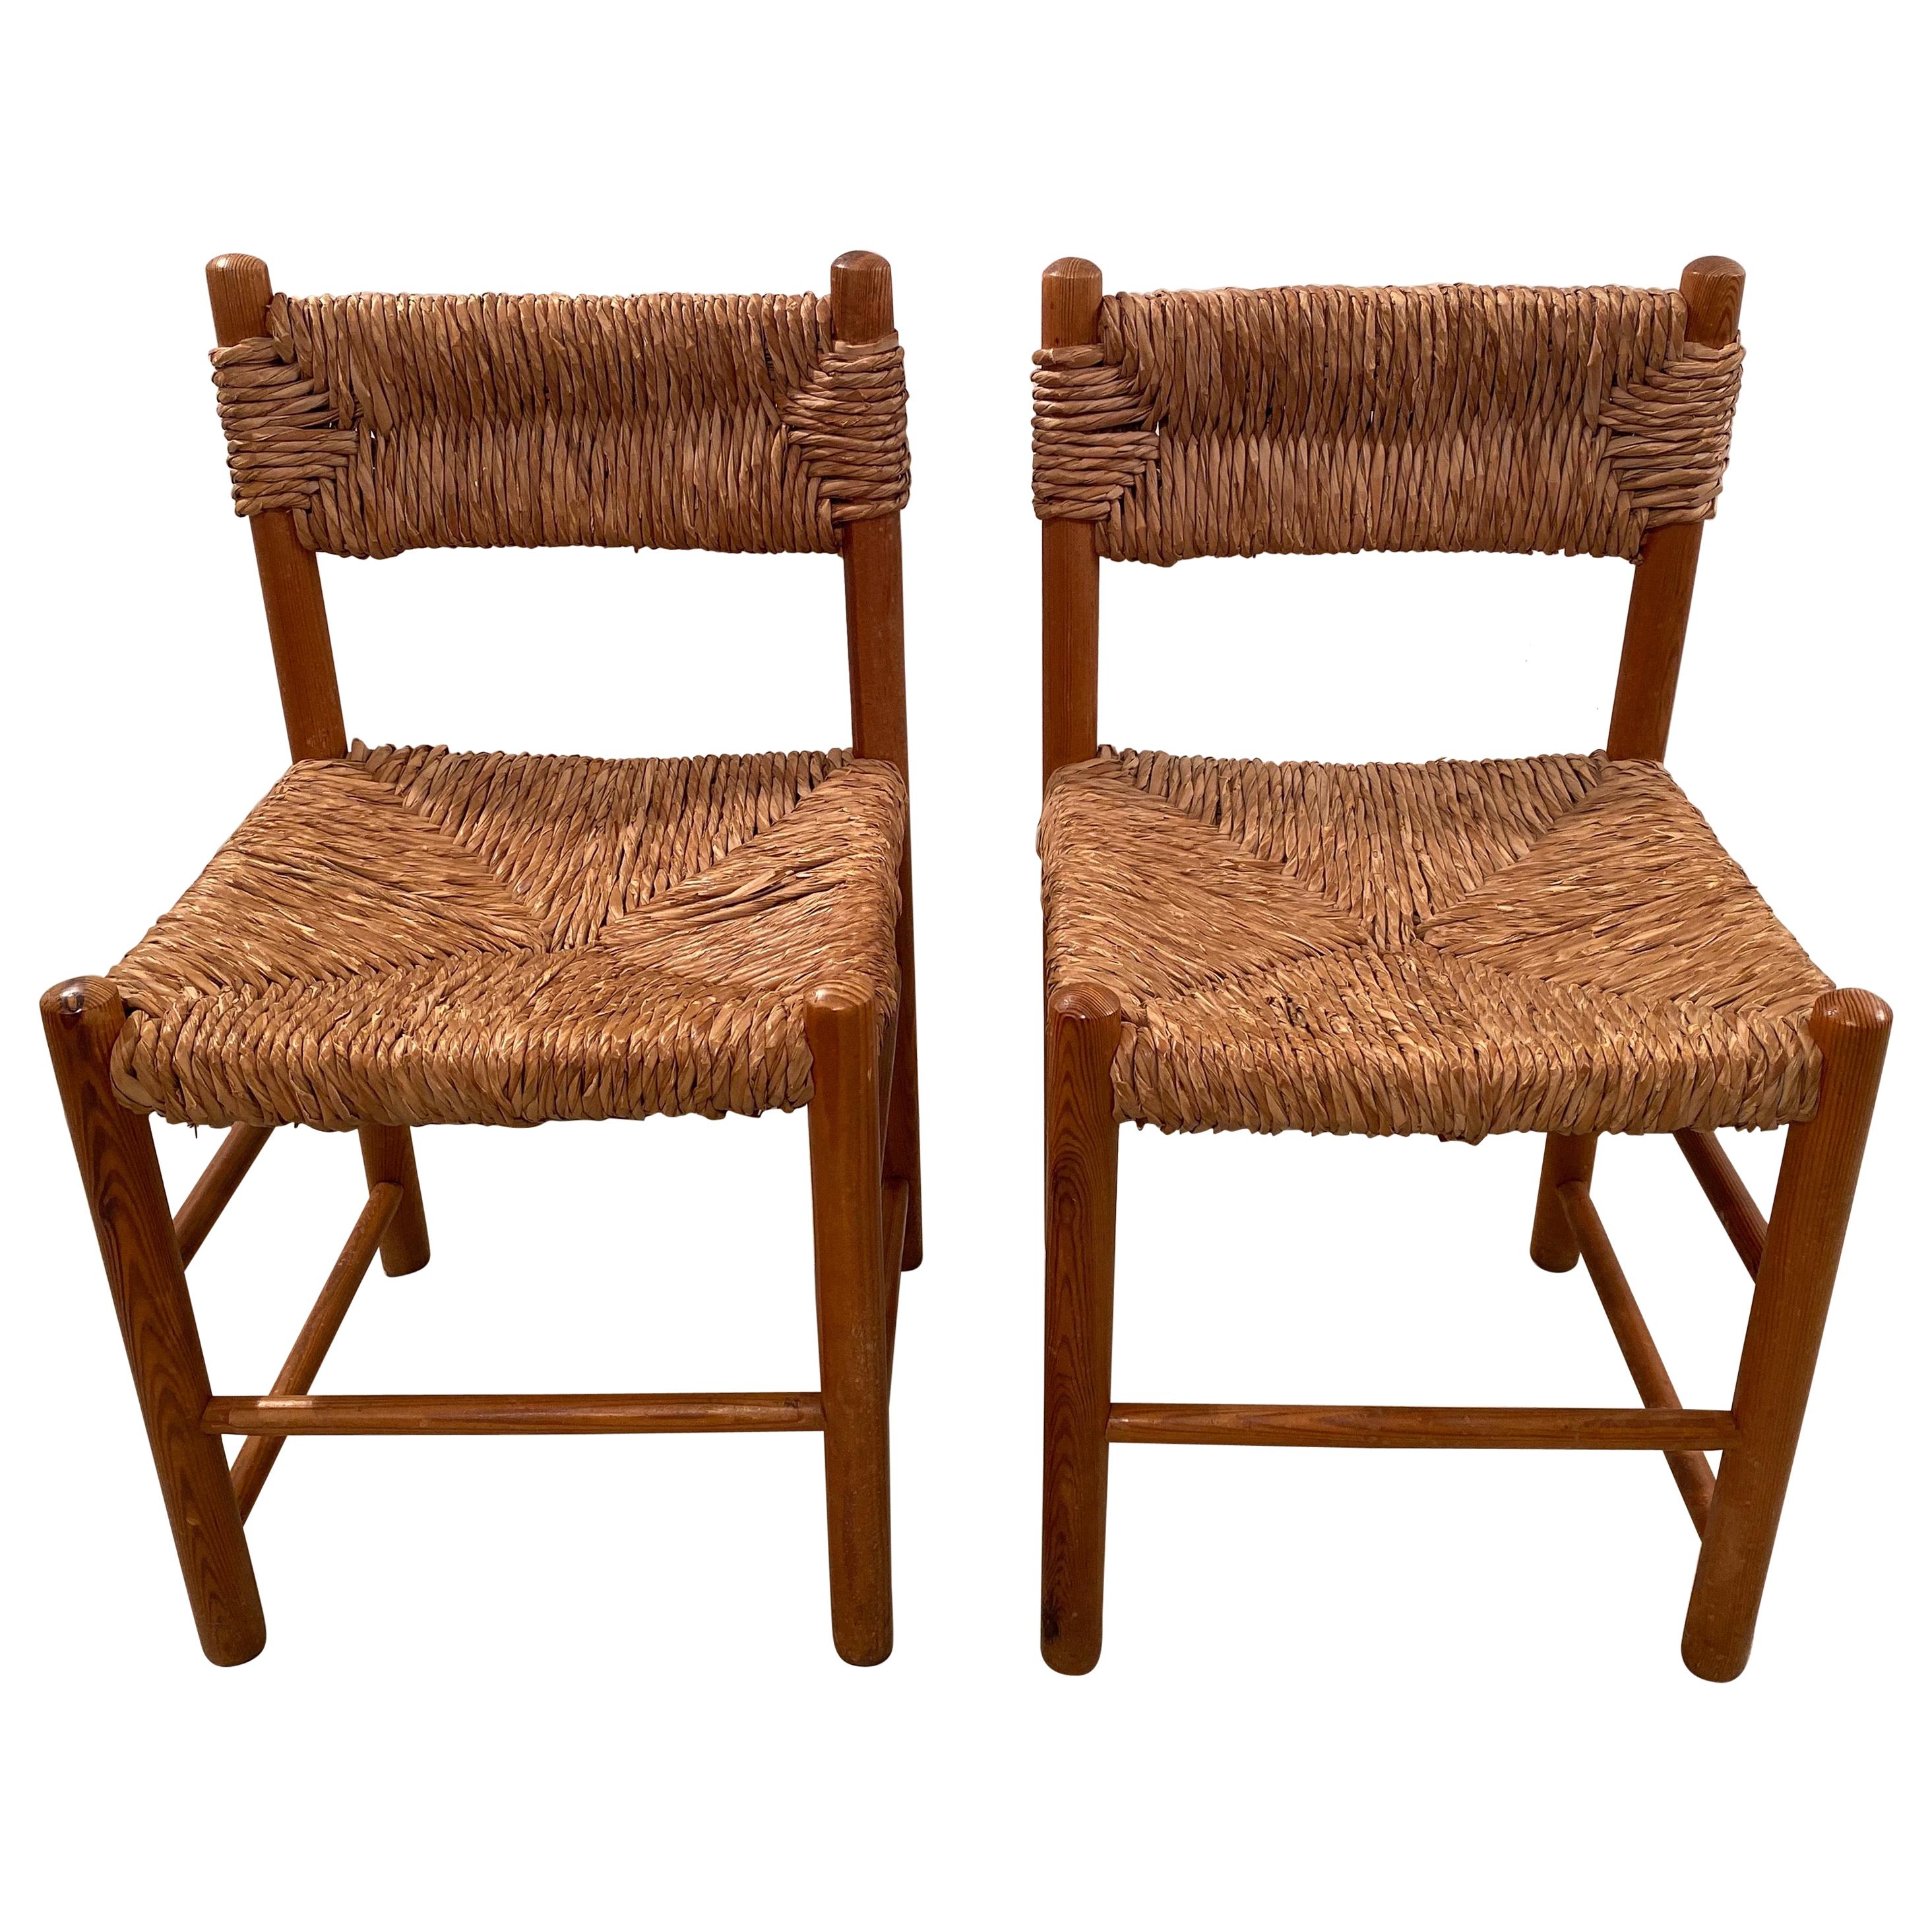 Another Pair of Dordogne Chairs by Charlotte Perriand for Sentou For Sale